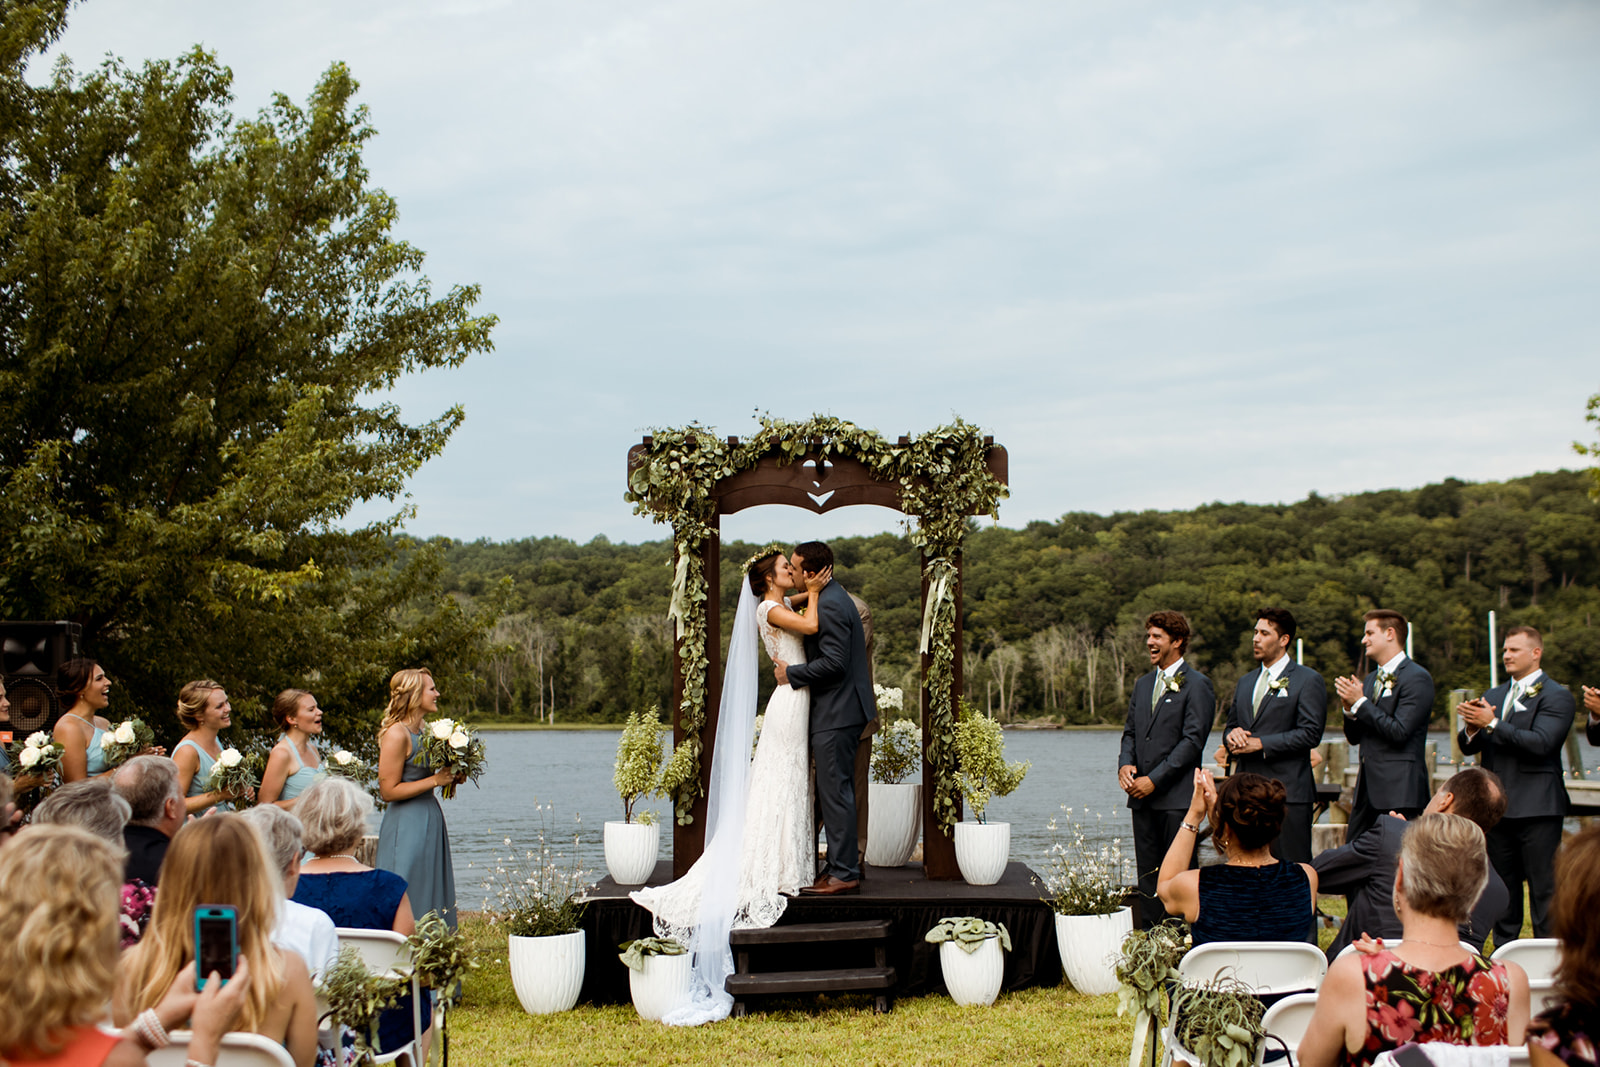 Outdoor Tented Backyard Wedding at Private Residence in Chester, CT | Sommar & Ben